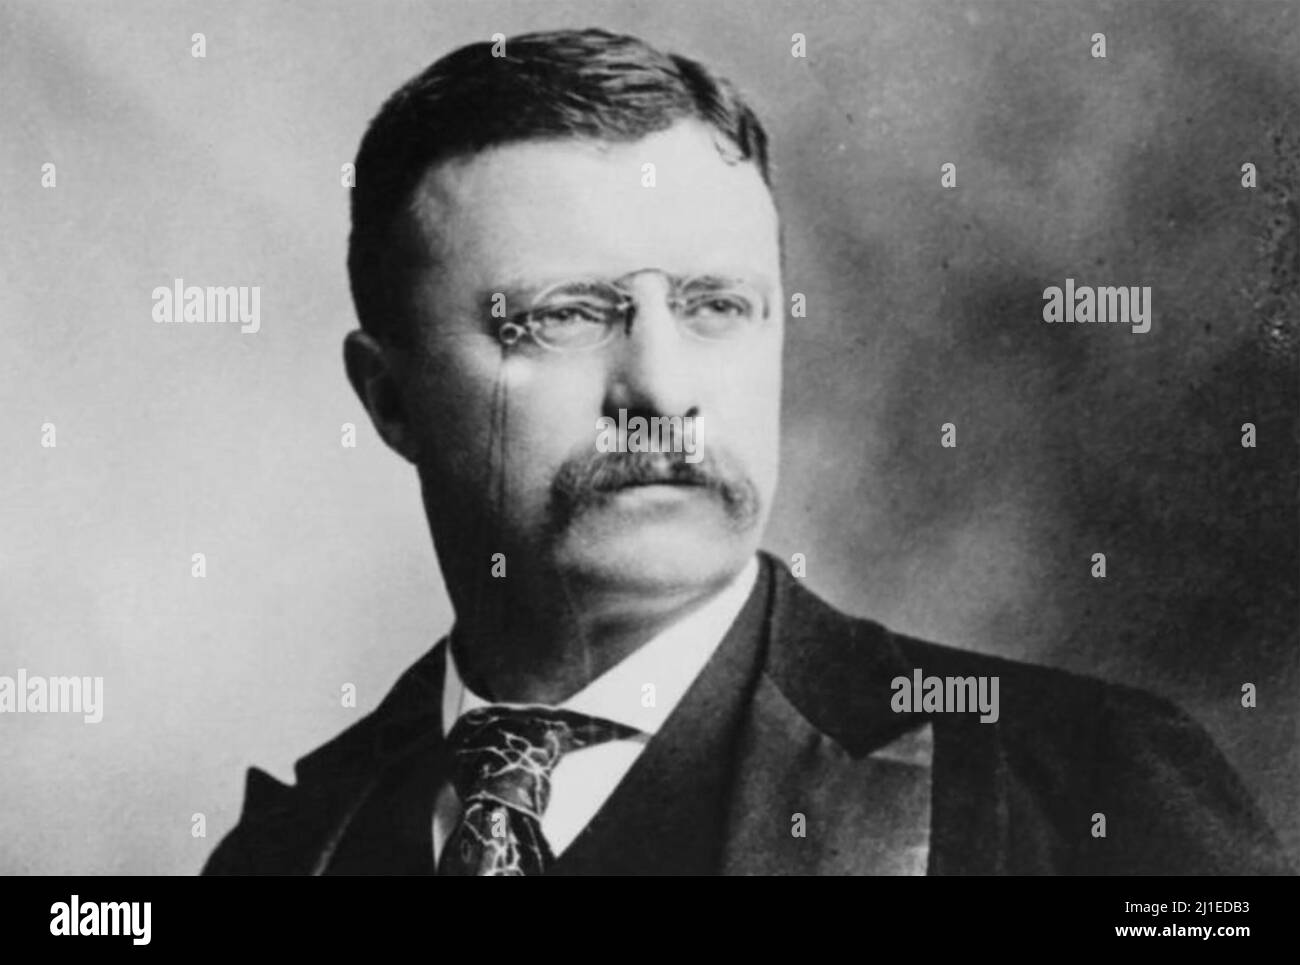 THEODORE ROOSEVELT (1858-1919)  26th President of the United States, about 1904. Stock Photo